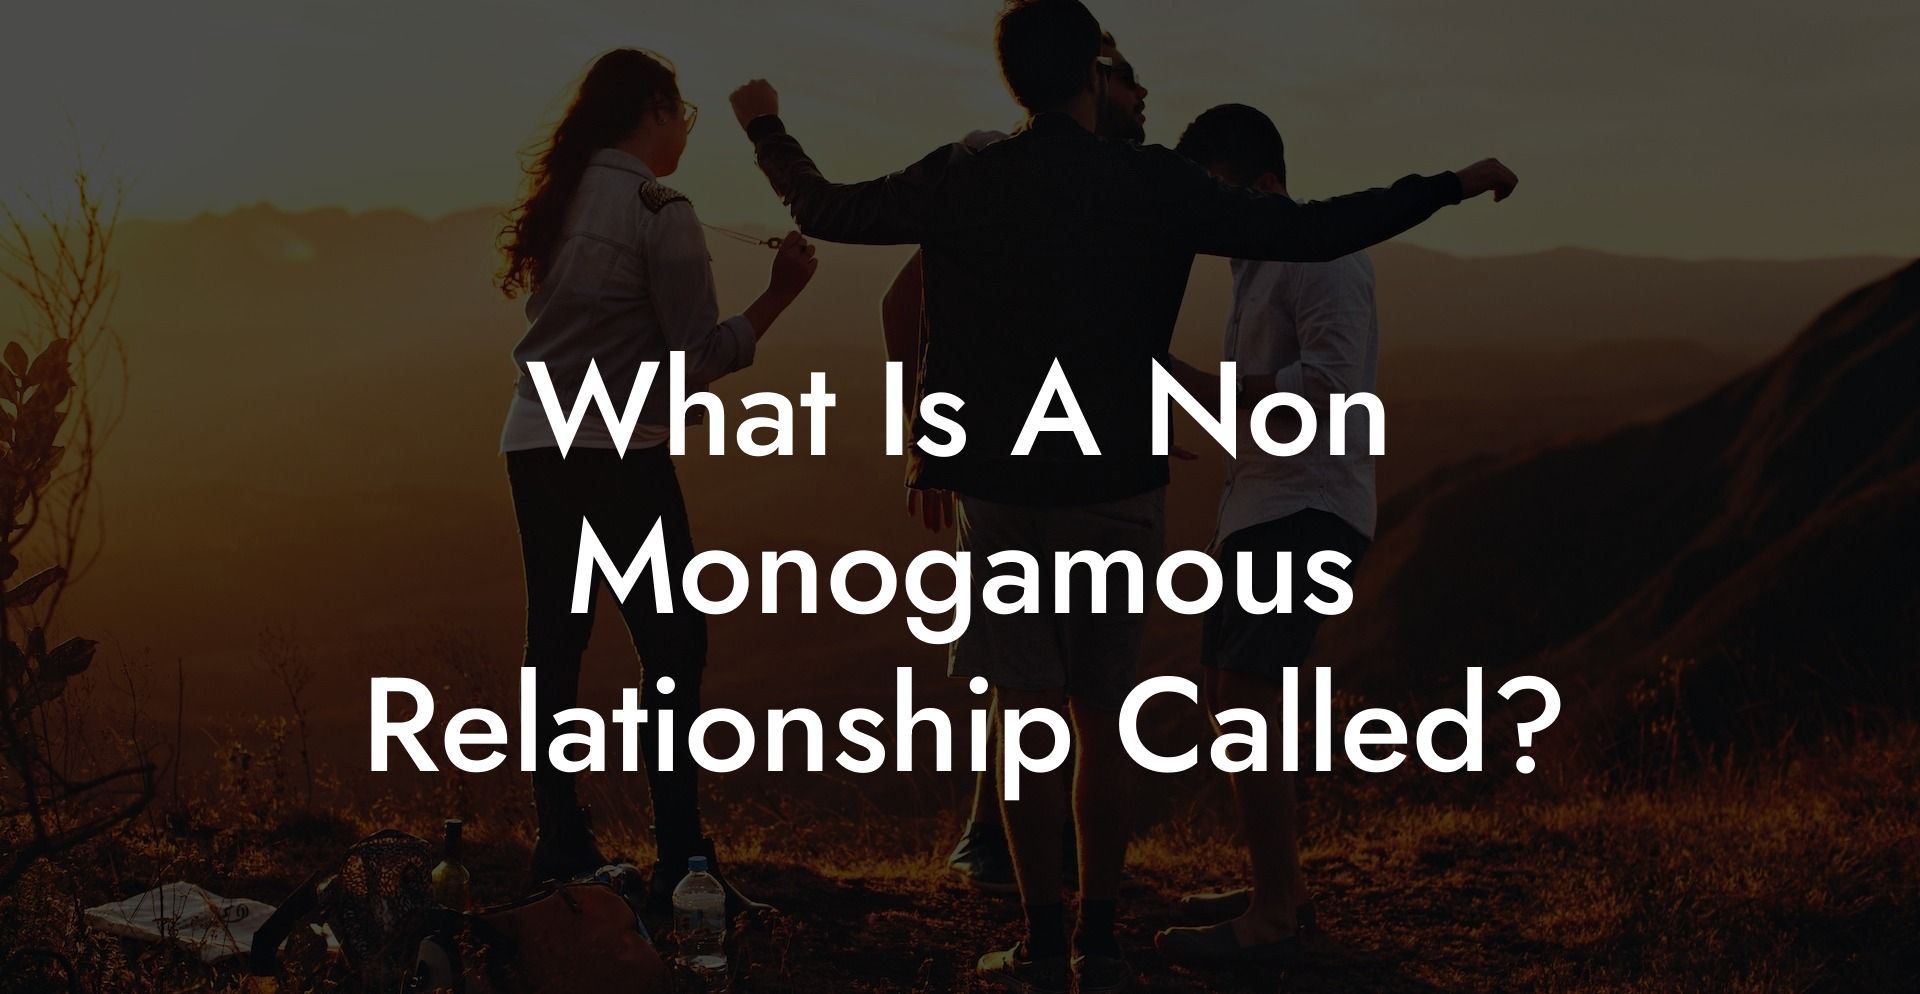 What Is A Non Monogamous Relationship Called?